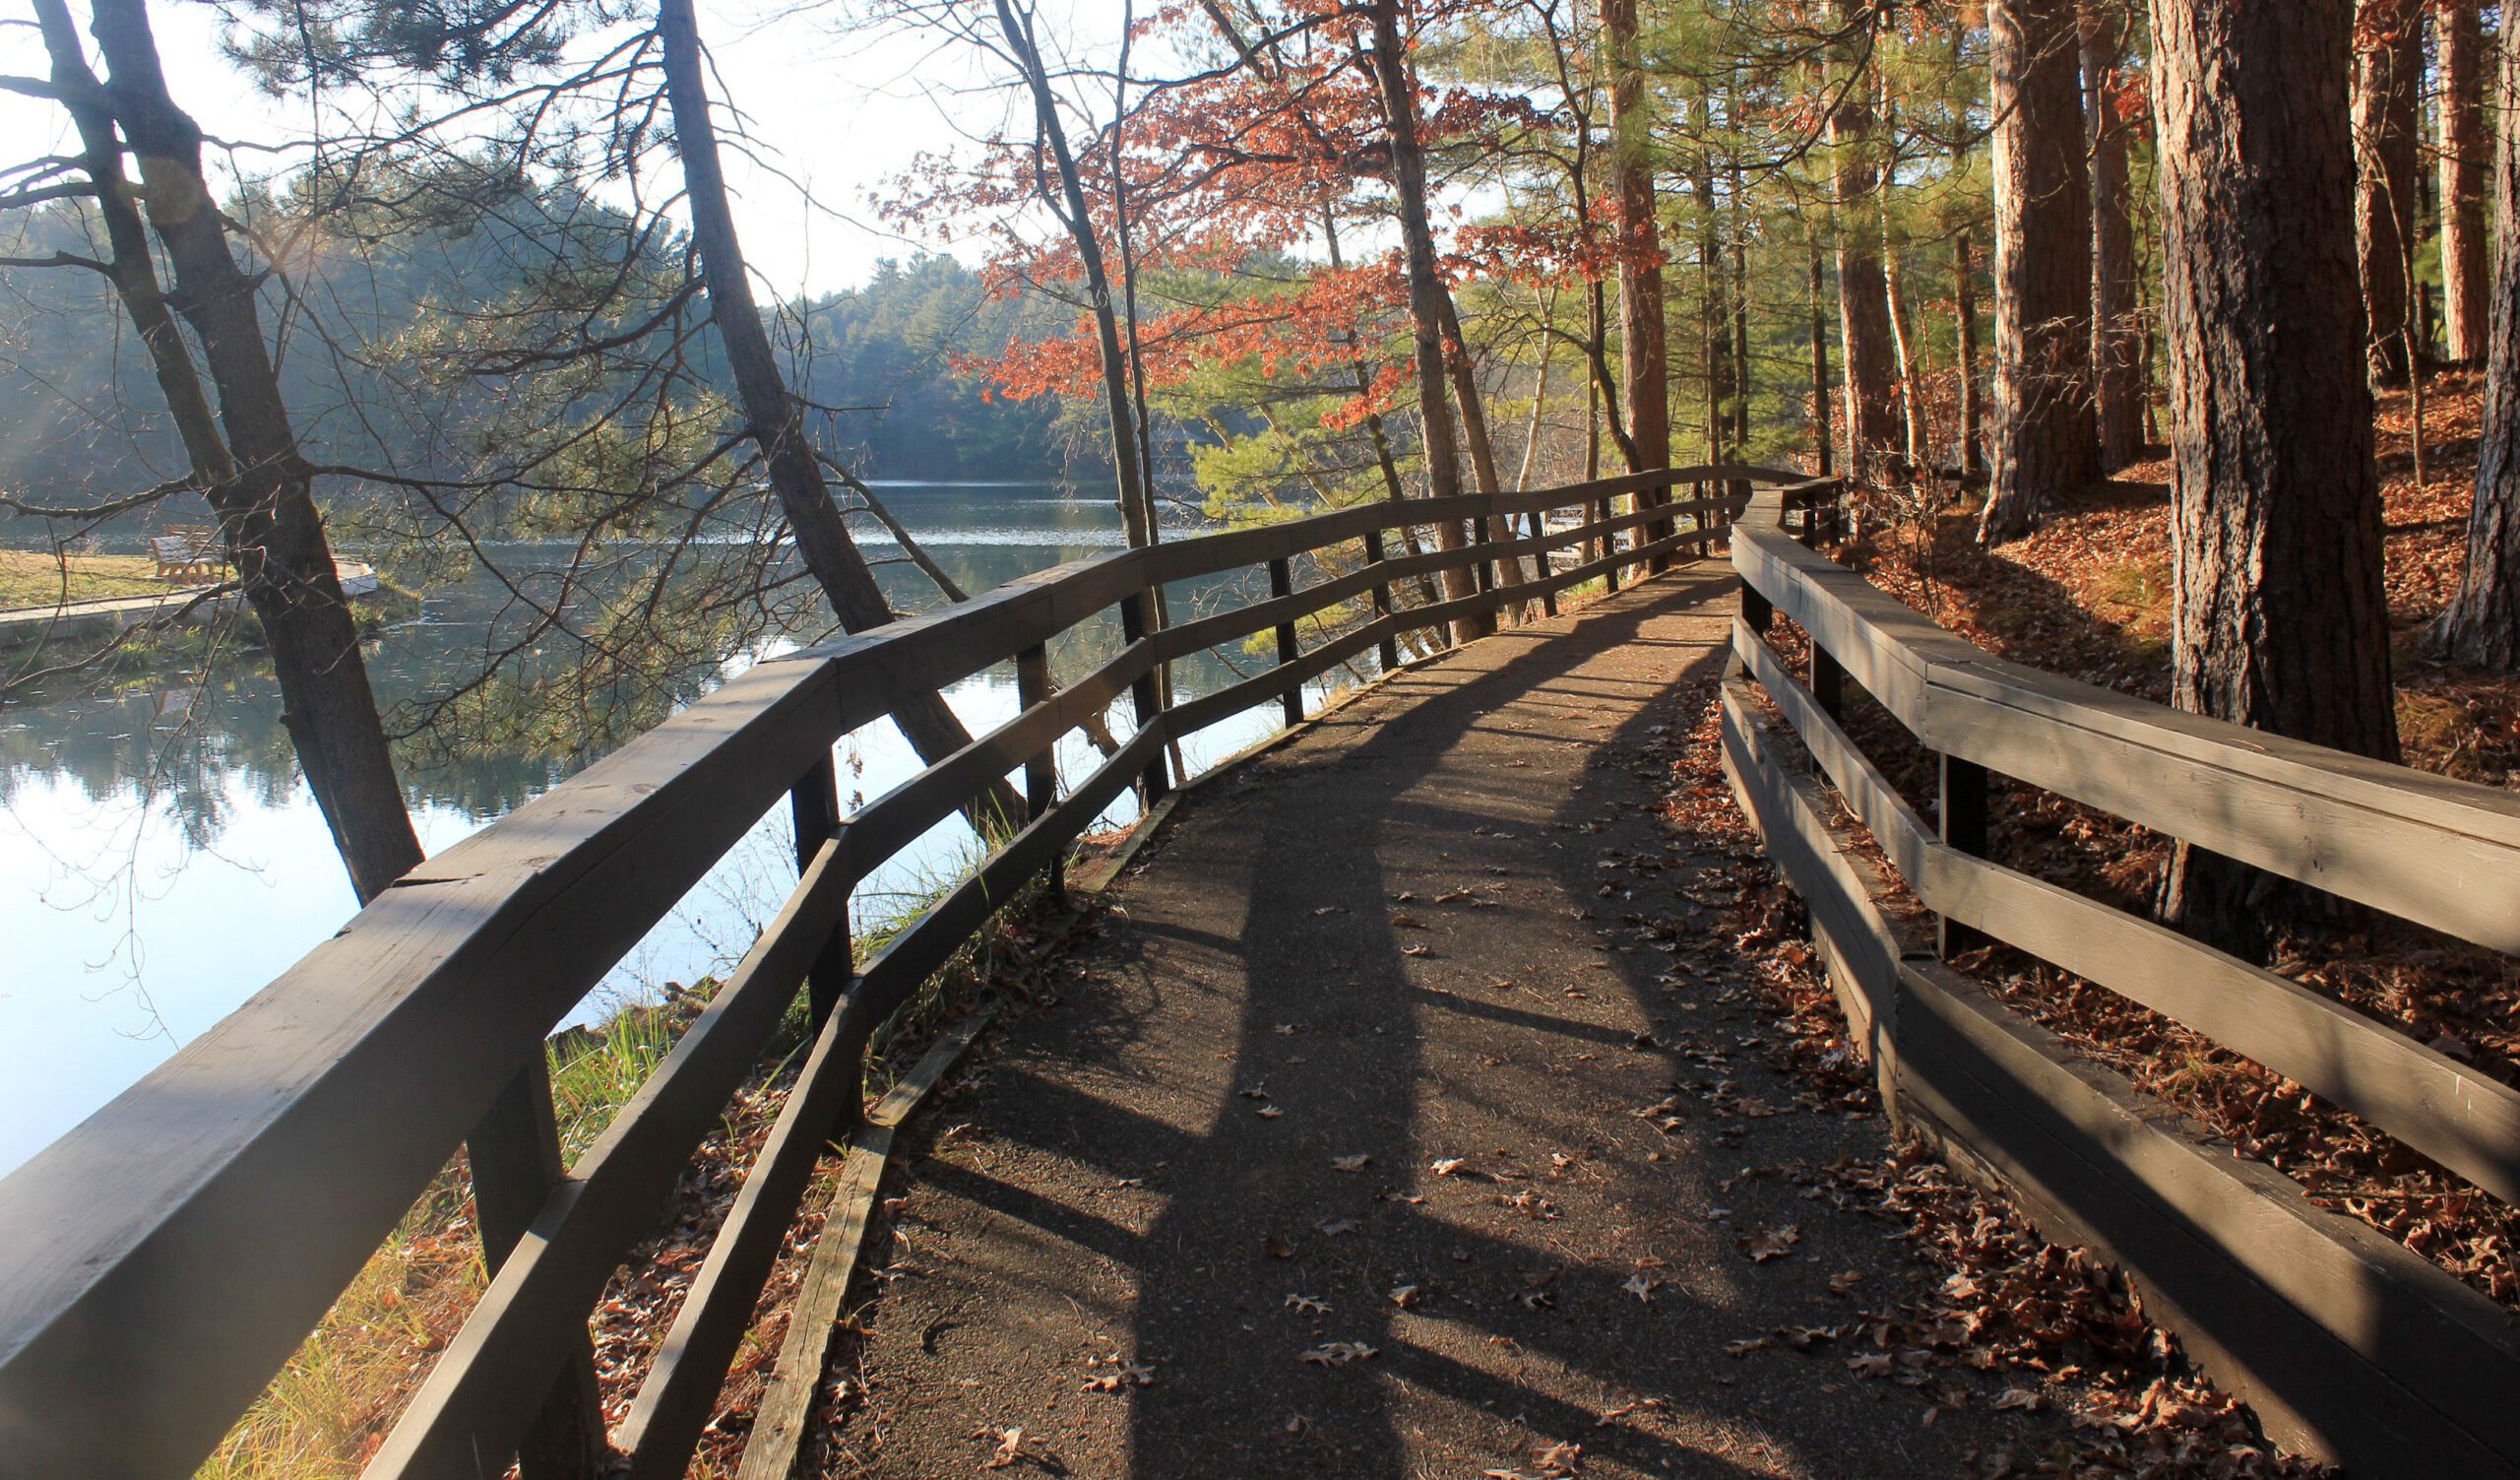 Wooden walkway next to the lake